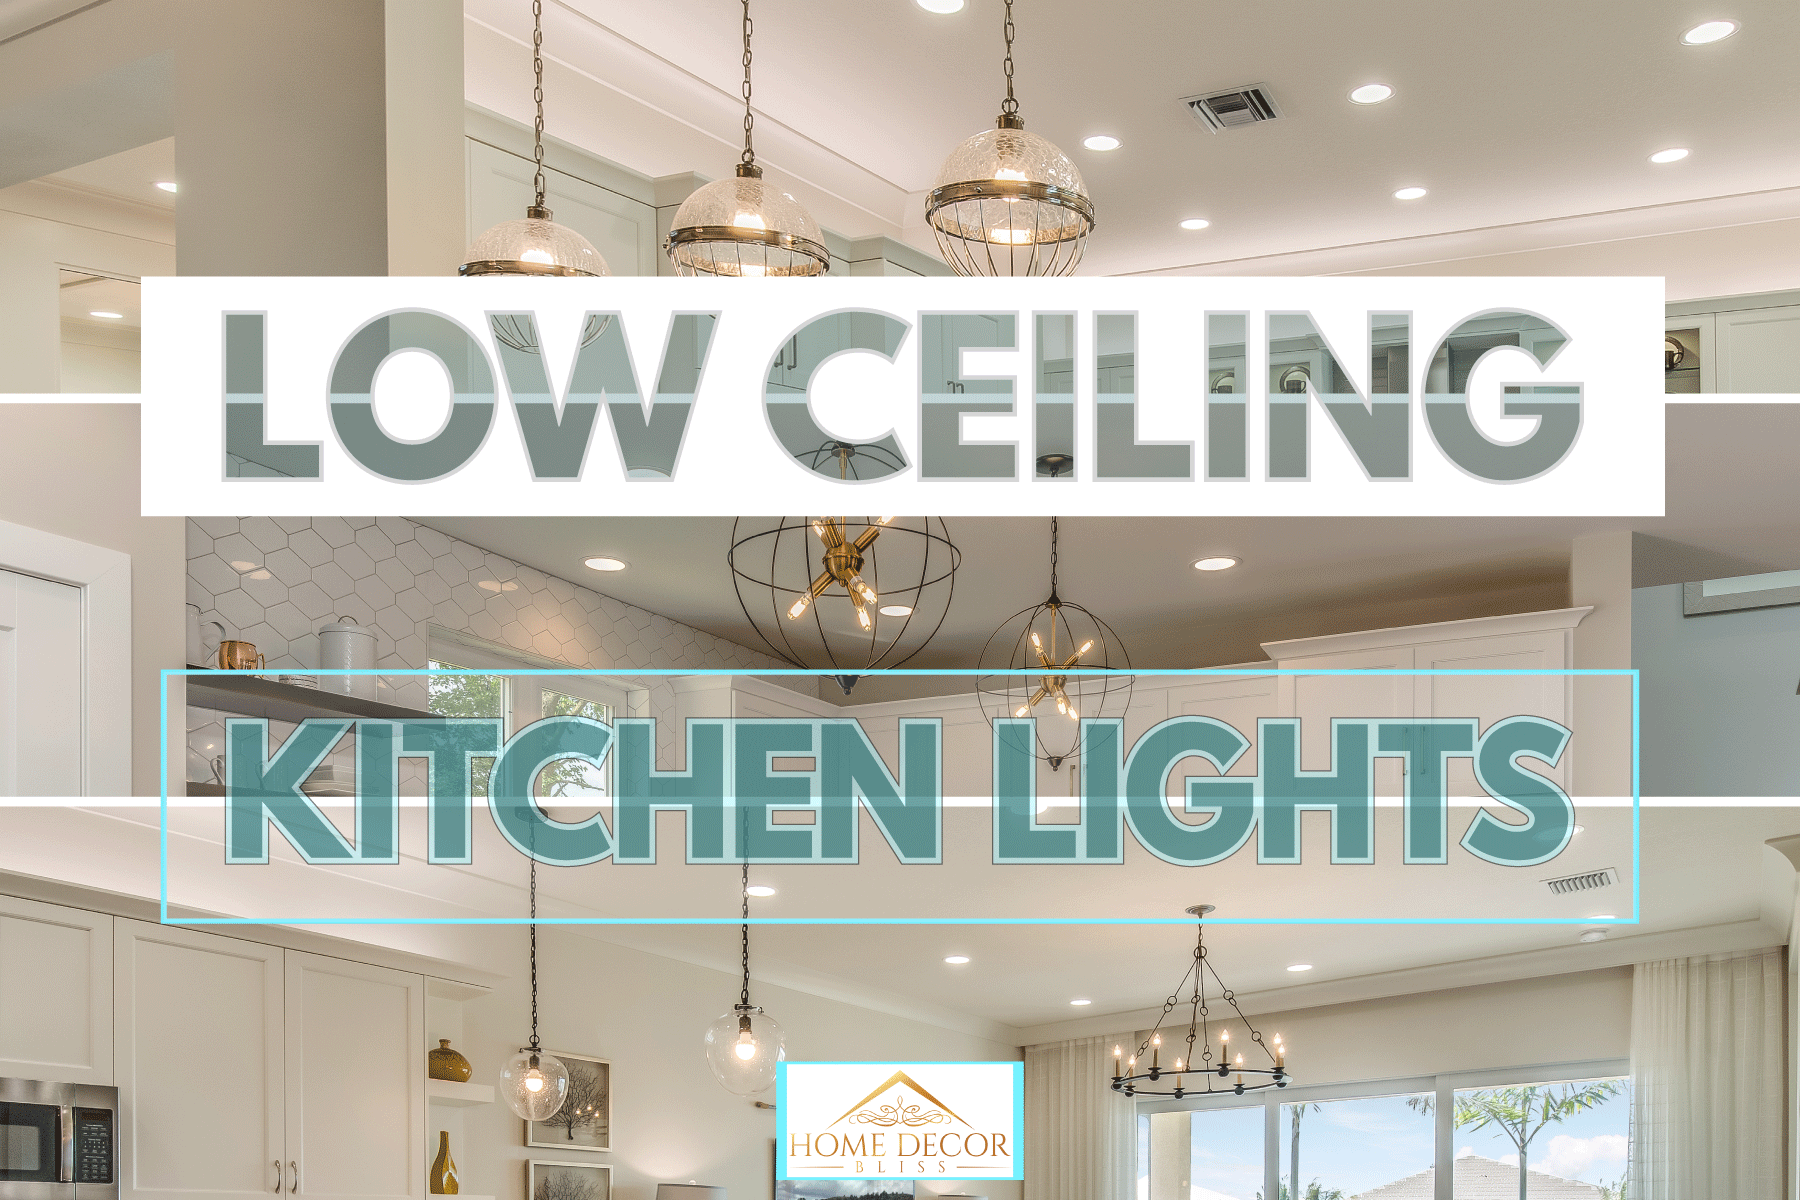 Best Kitchen Lights For Low Ceiling   Home Decor Bliss